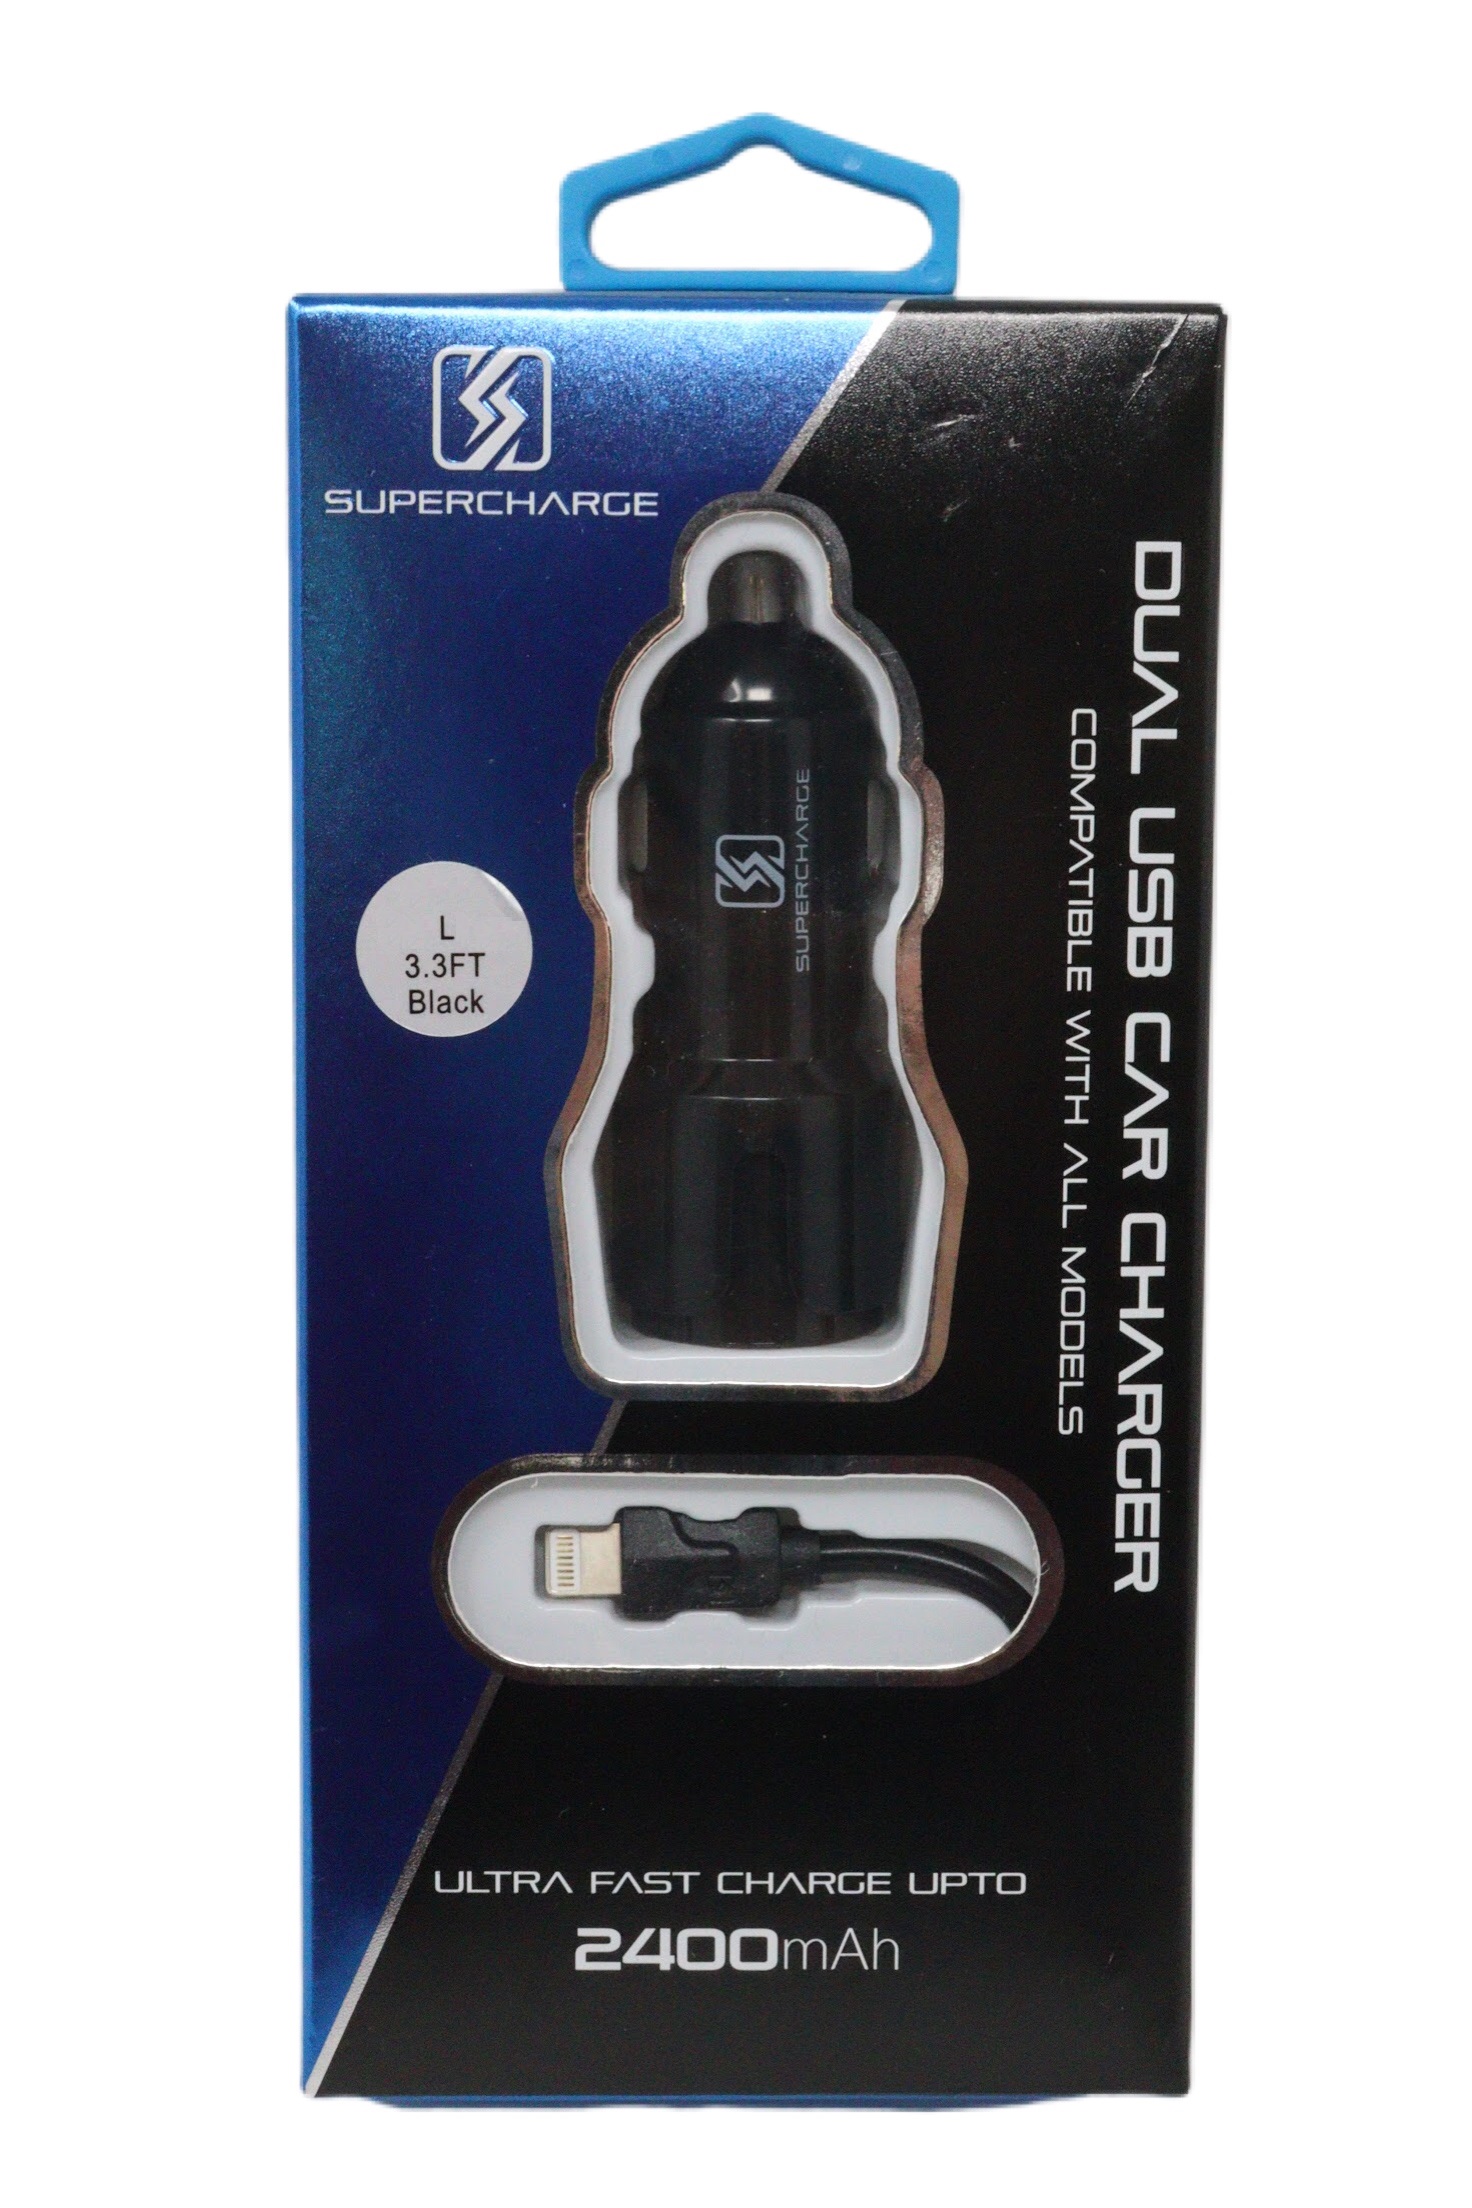 S459 SuperCharge Dual USB Car Charger Ultrafast 2400mAh